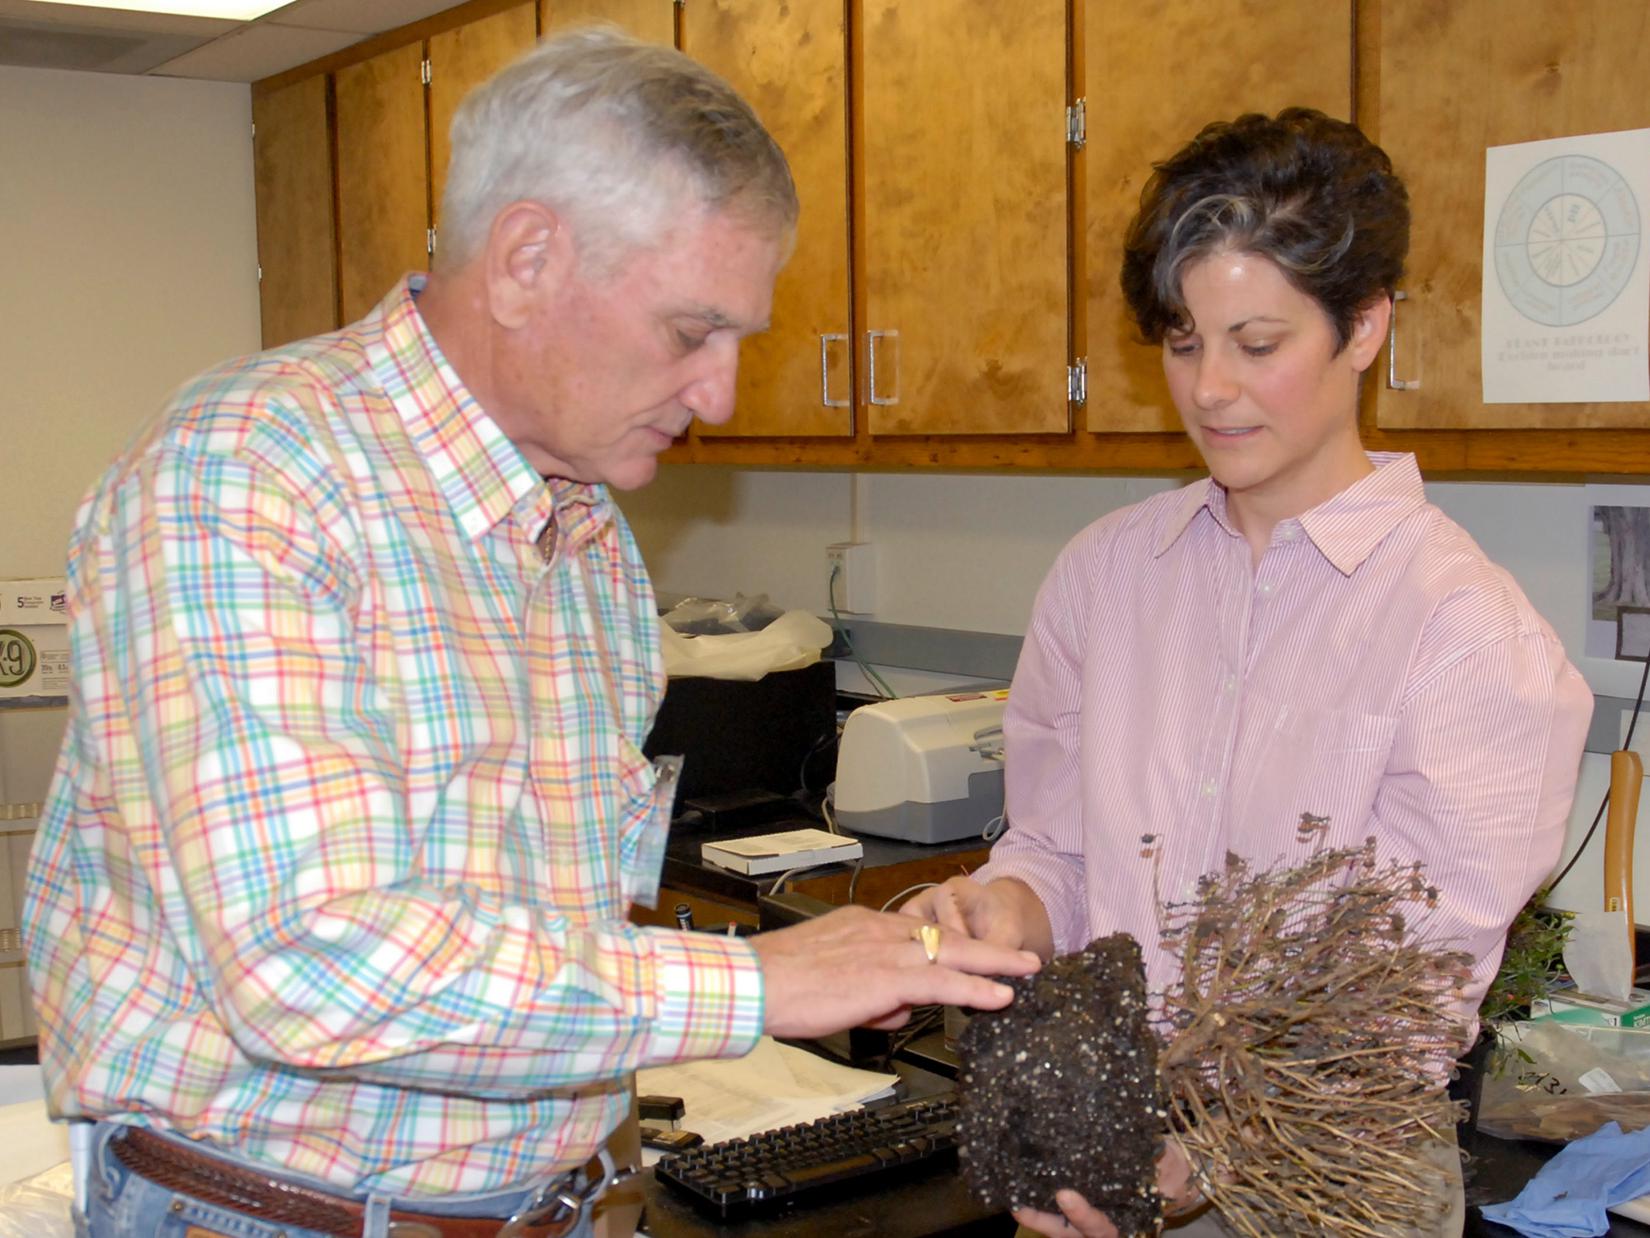 Lynn McMahan of Vancleave, past president of the Mississippi Master Gardeners, learns about plant diseases from Clarissa Balbalian, manager of the Mississippi State University Extension Service's plant diagnostic lab, during campus tours in 2013. (File photo by MSU Ag Communications/Linda Breazeale)